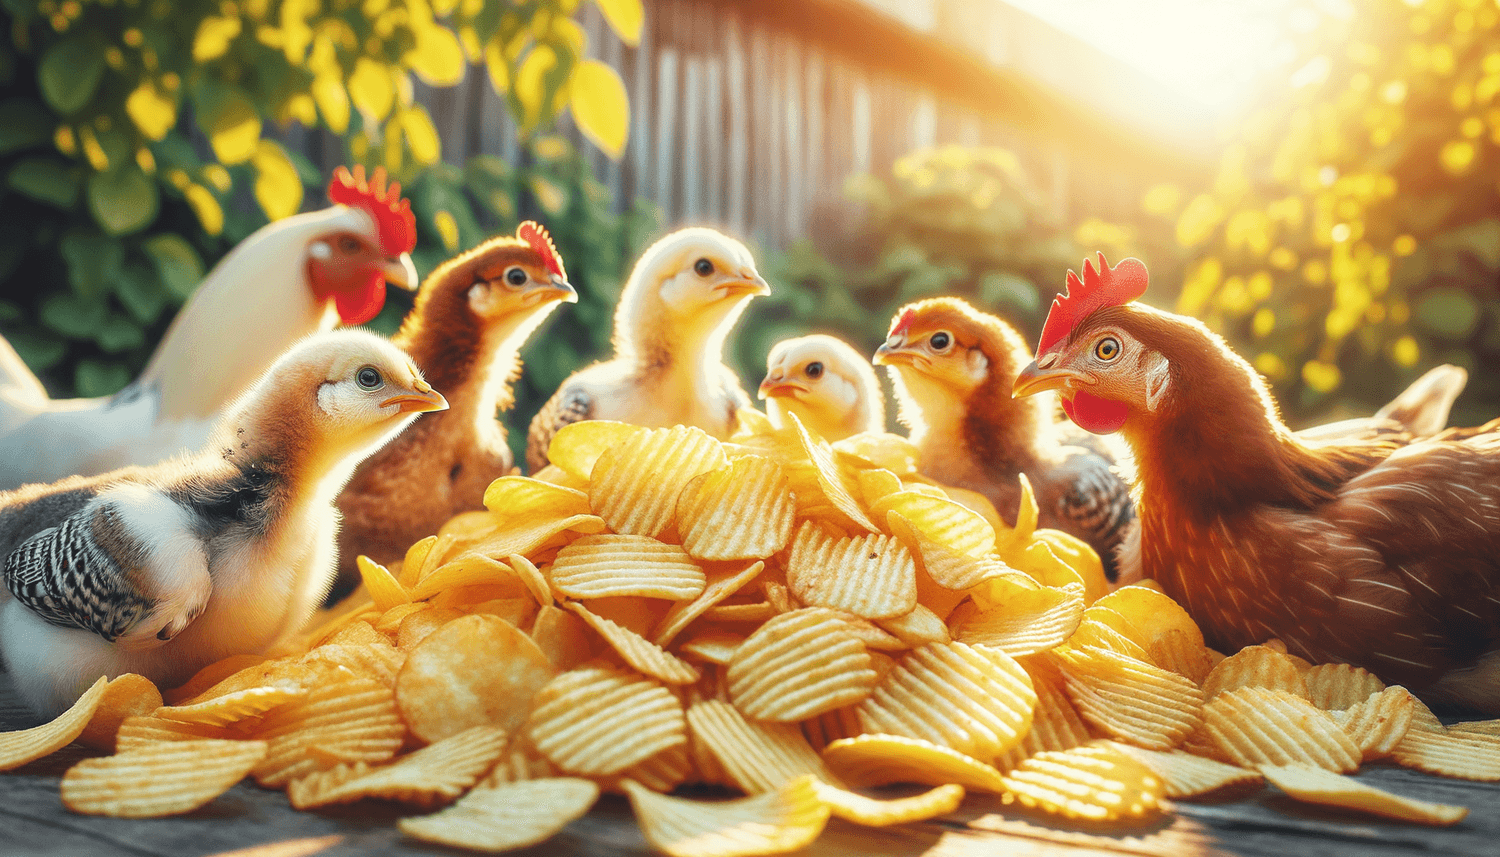 Can Chickens Eat Chips?